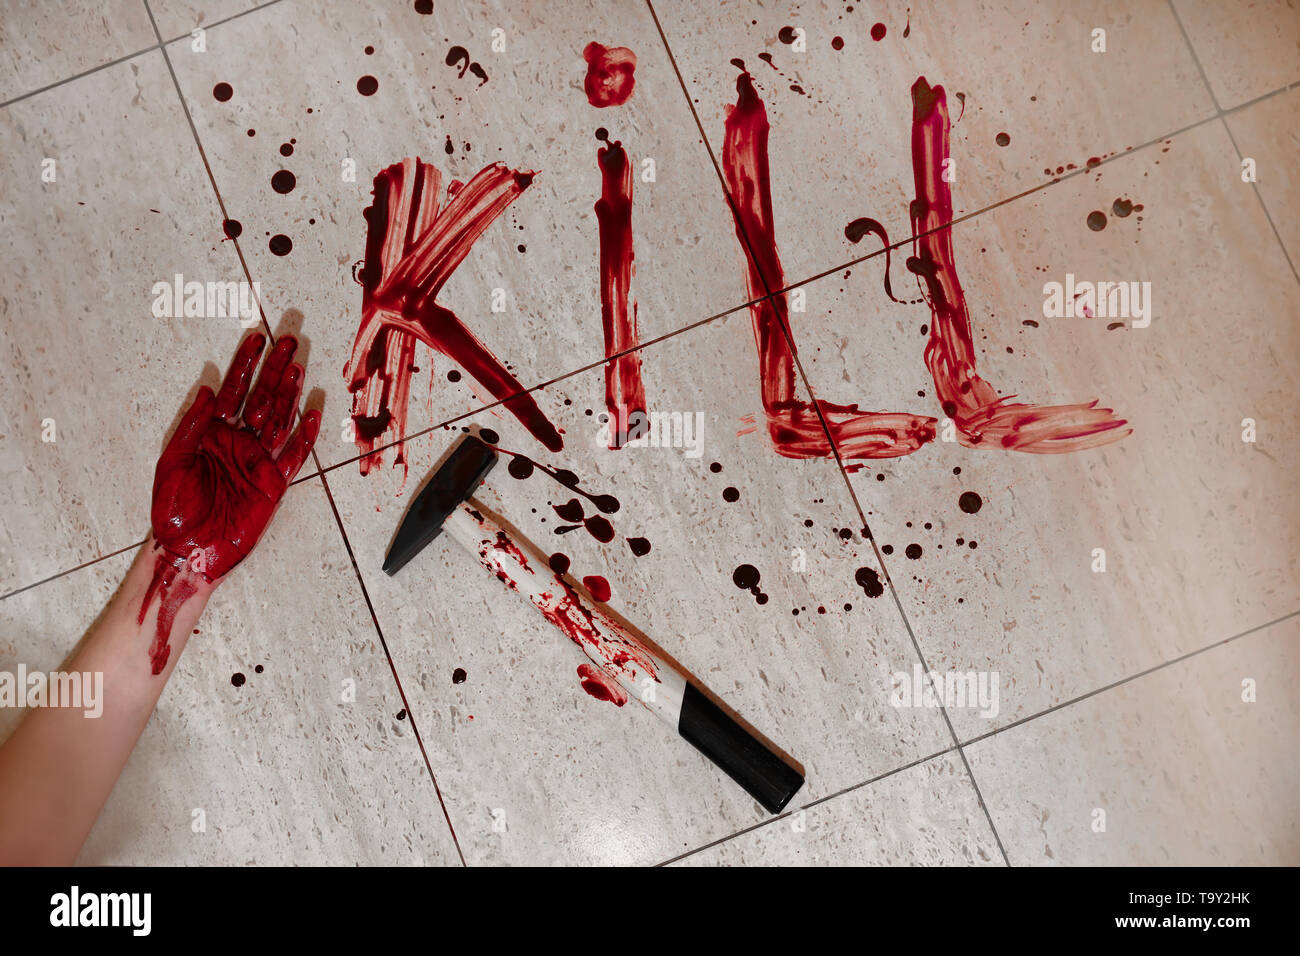 Kill Floor High Resolution Stock Photography and Images - Alamy